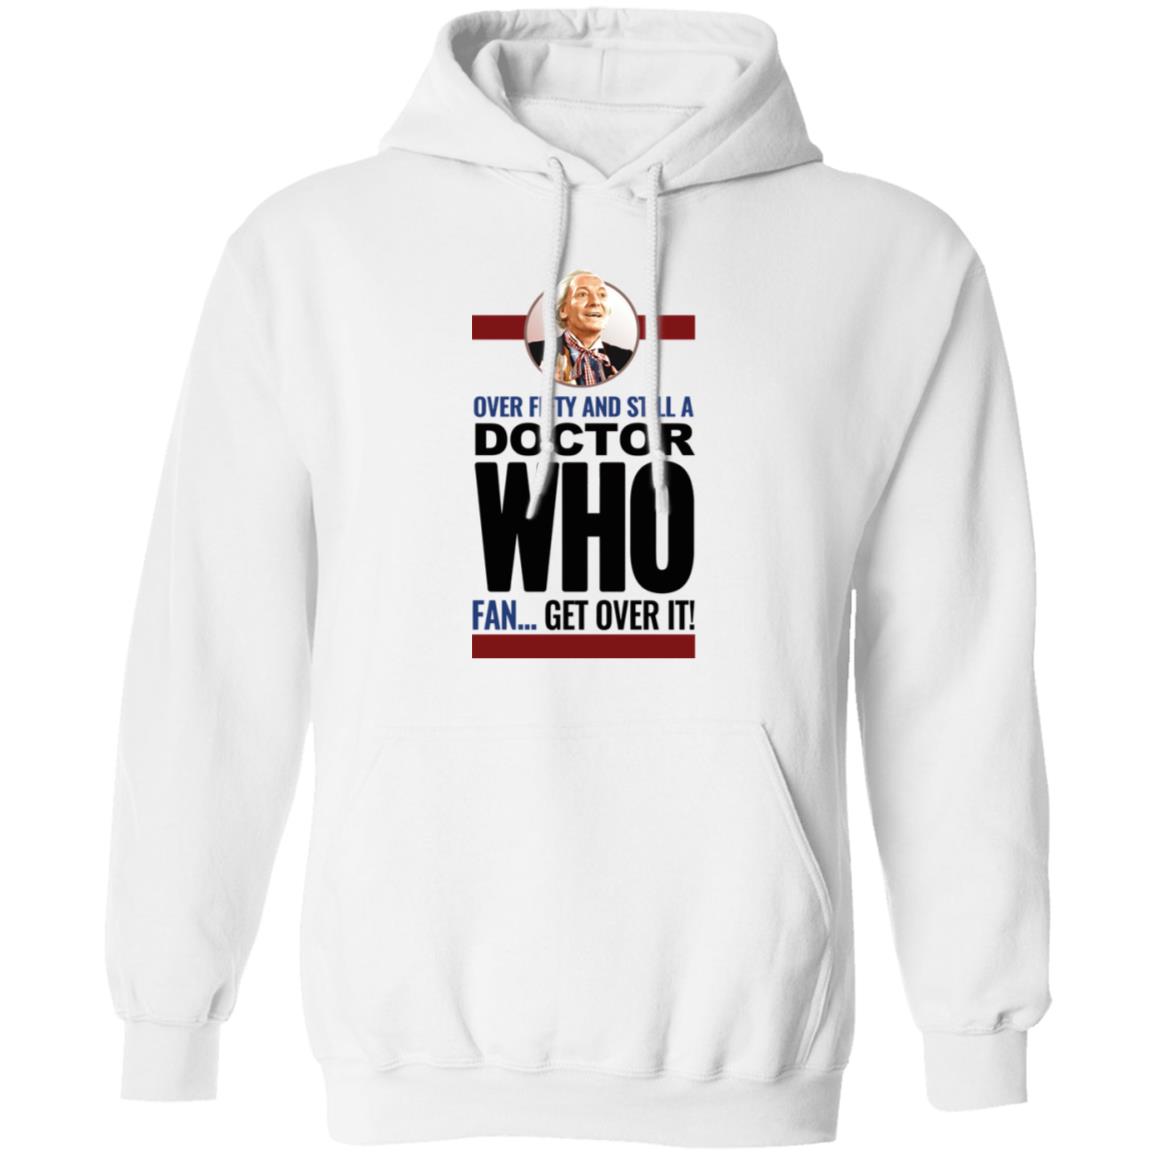 Over Fifty And Still A Doctor Who Fan Get Over It Shirt 1